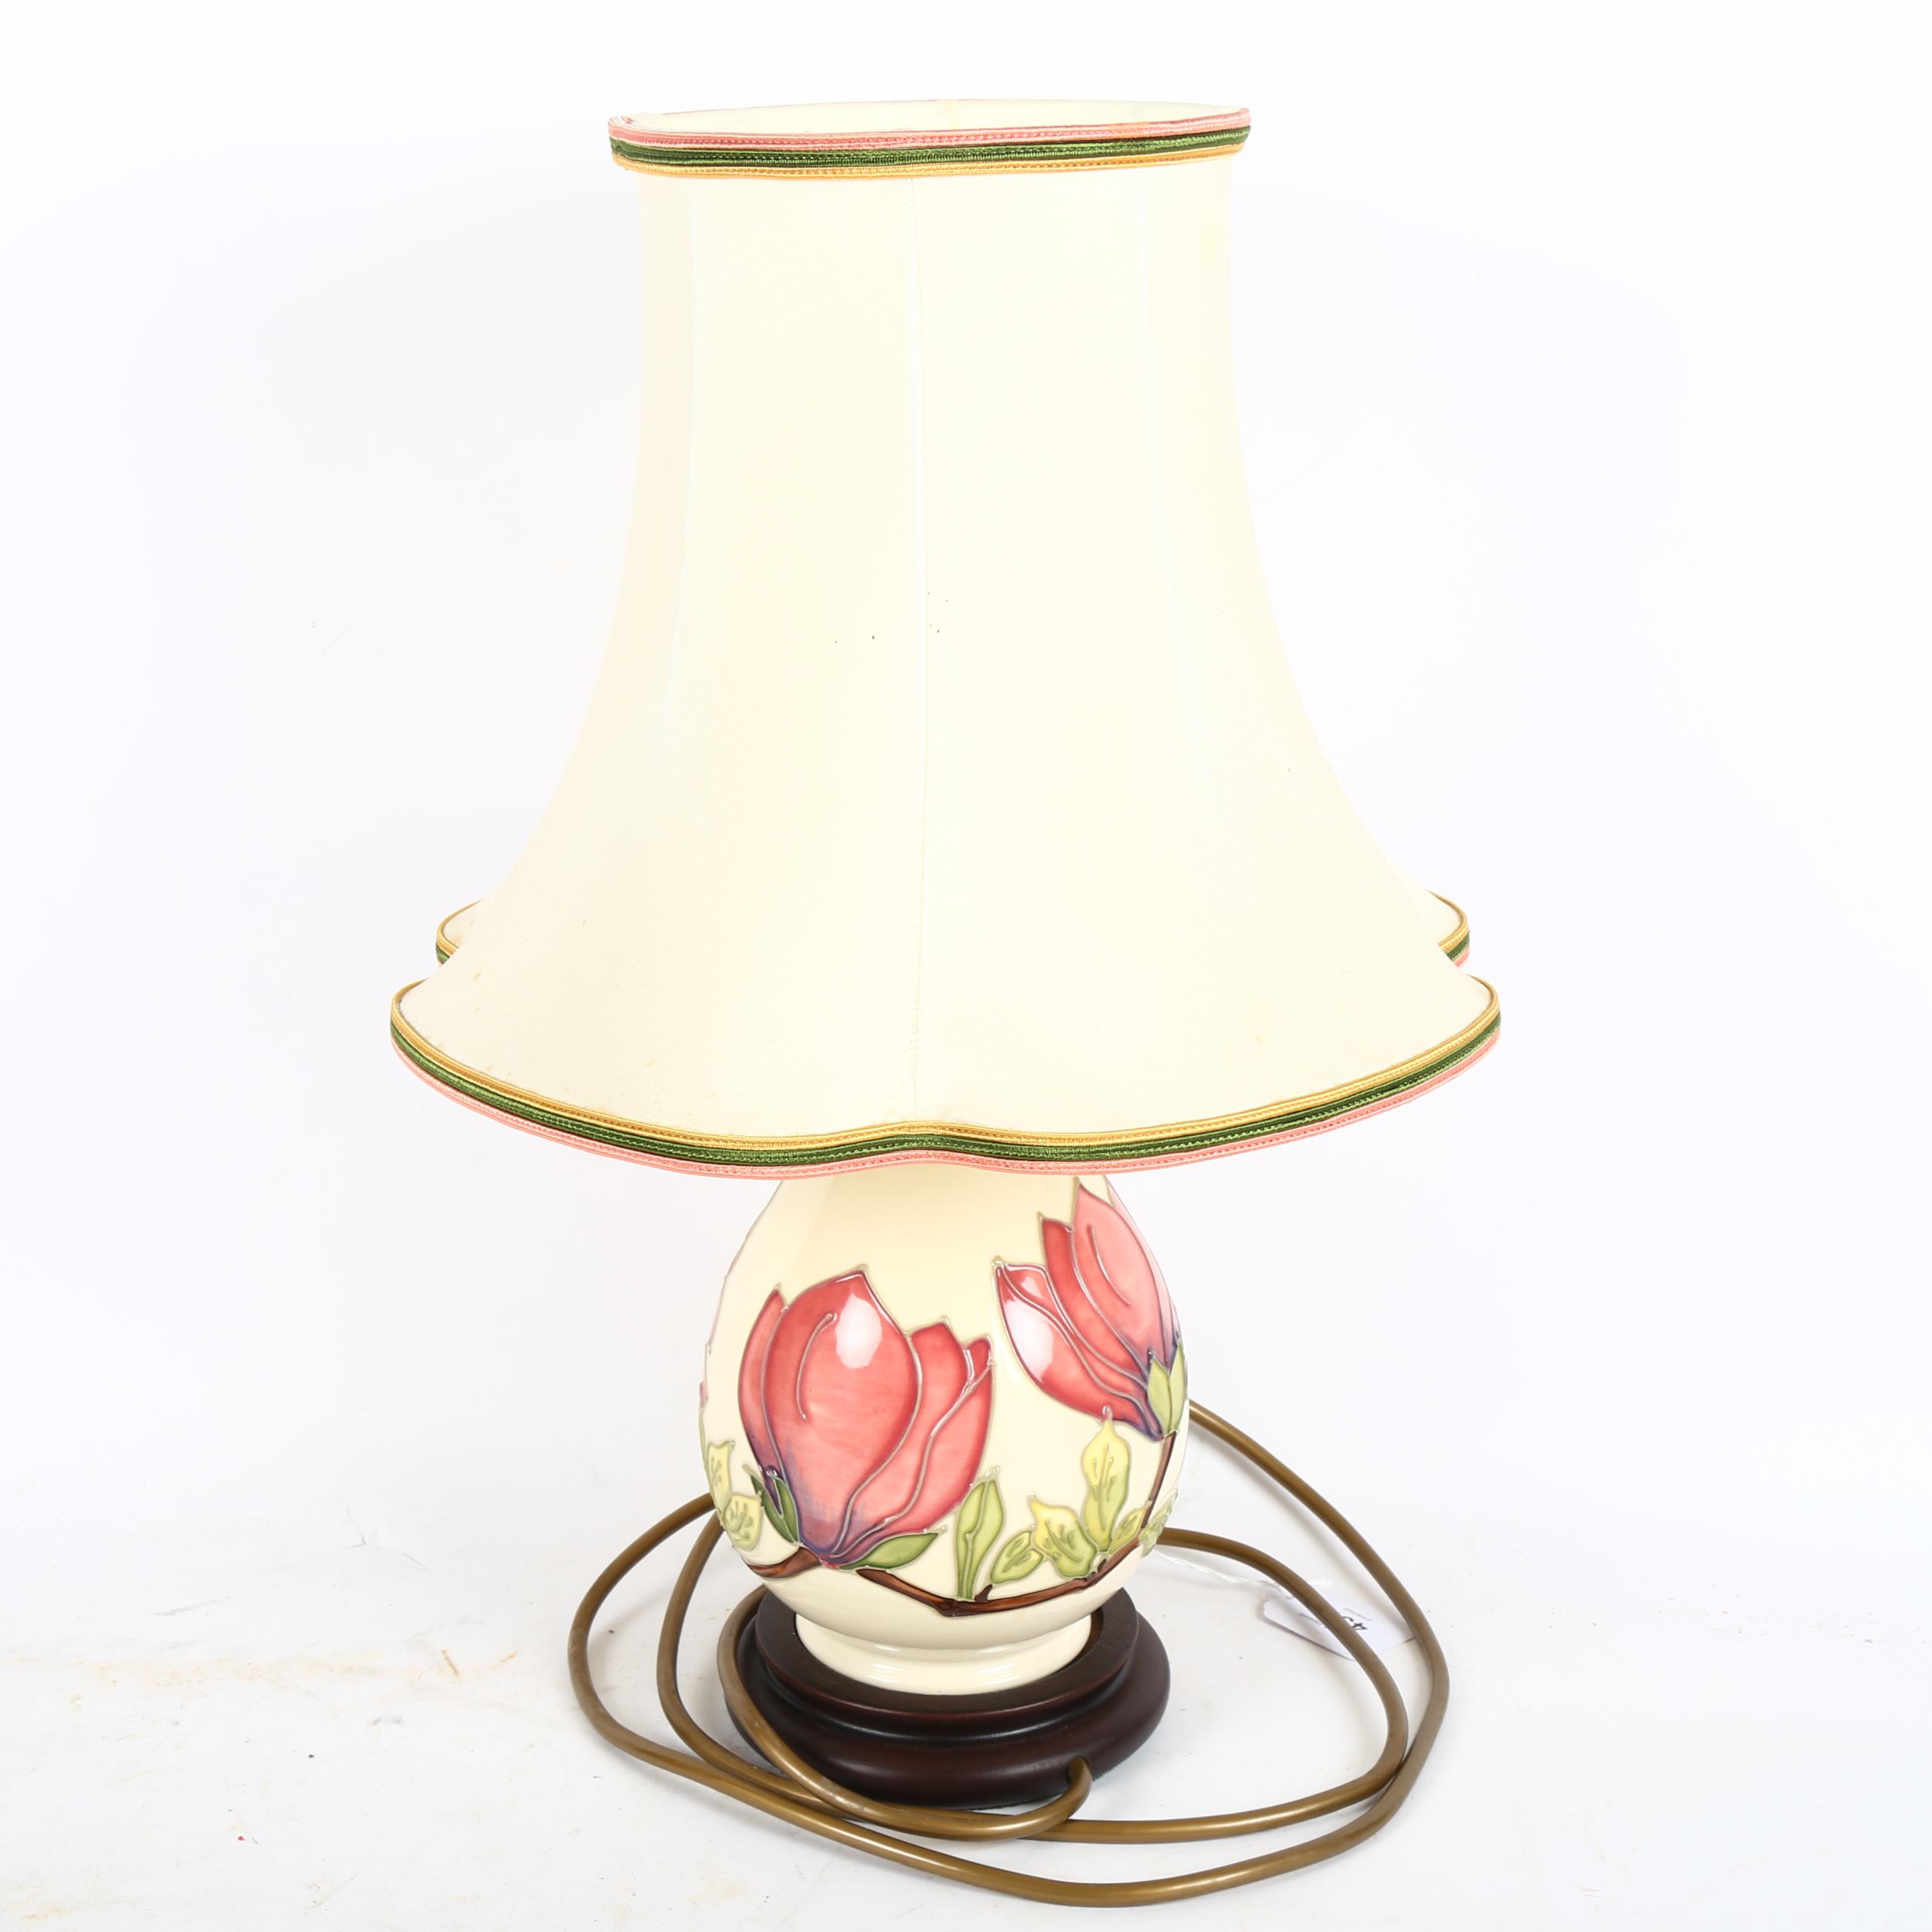 A Moorcroft ceramic table lamp with shade, height including shade 45cm